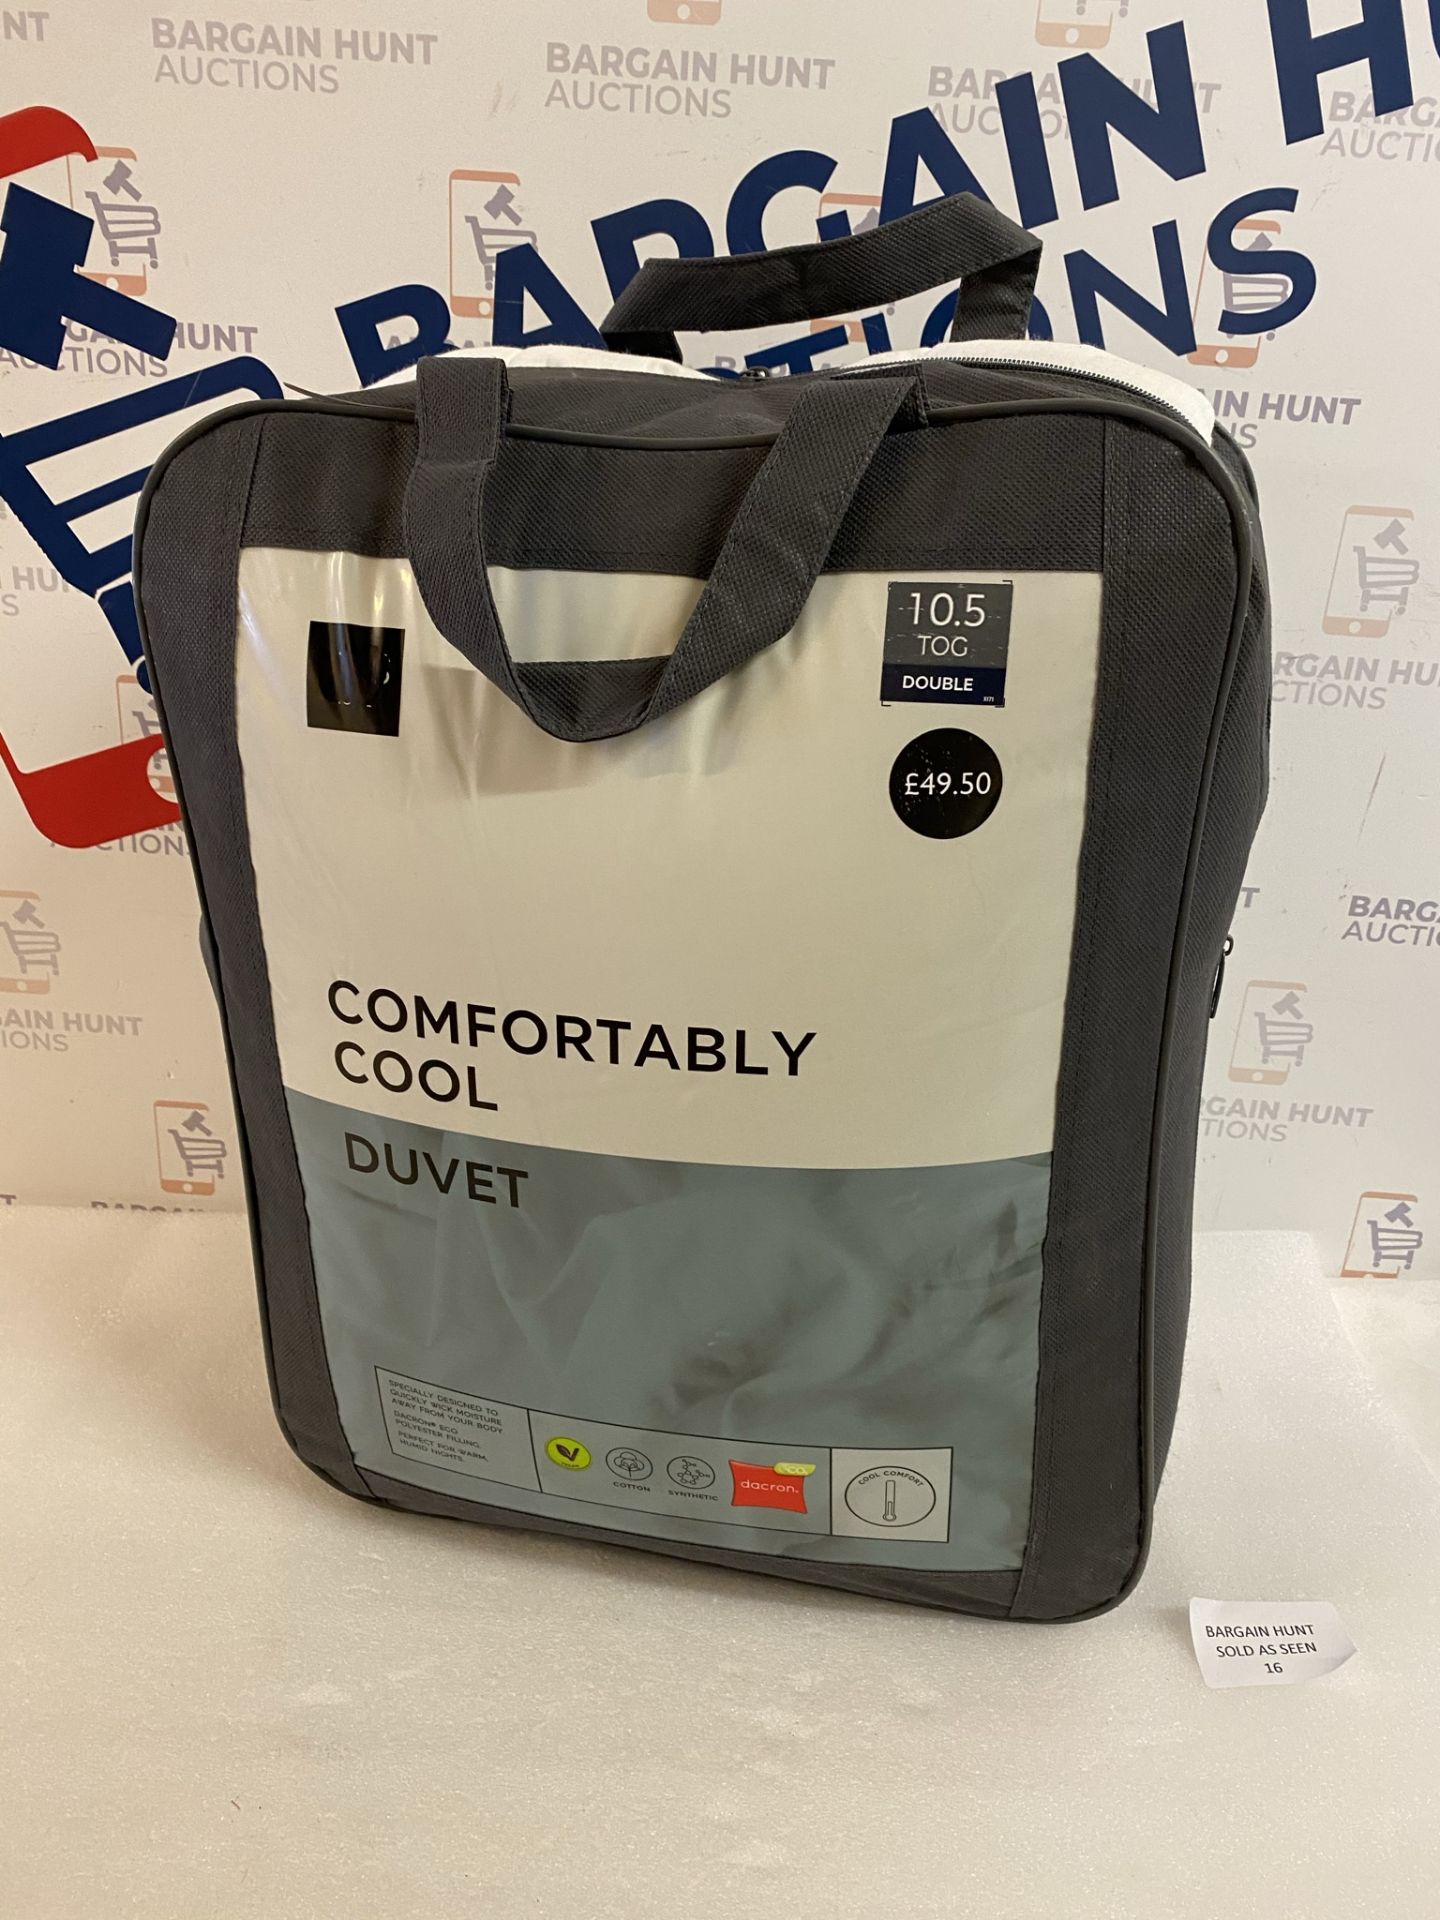 Comfortably Cool 10.5 Tog Duvet, Double RRP £49.50